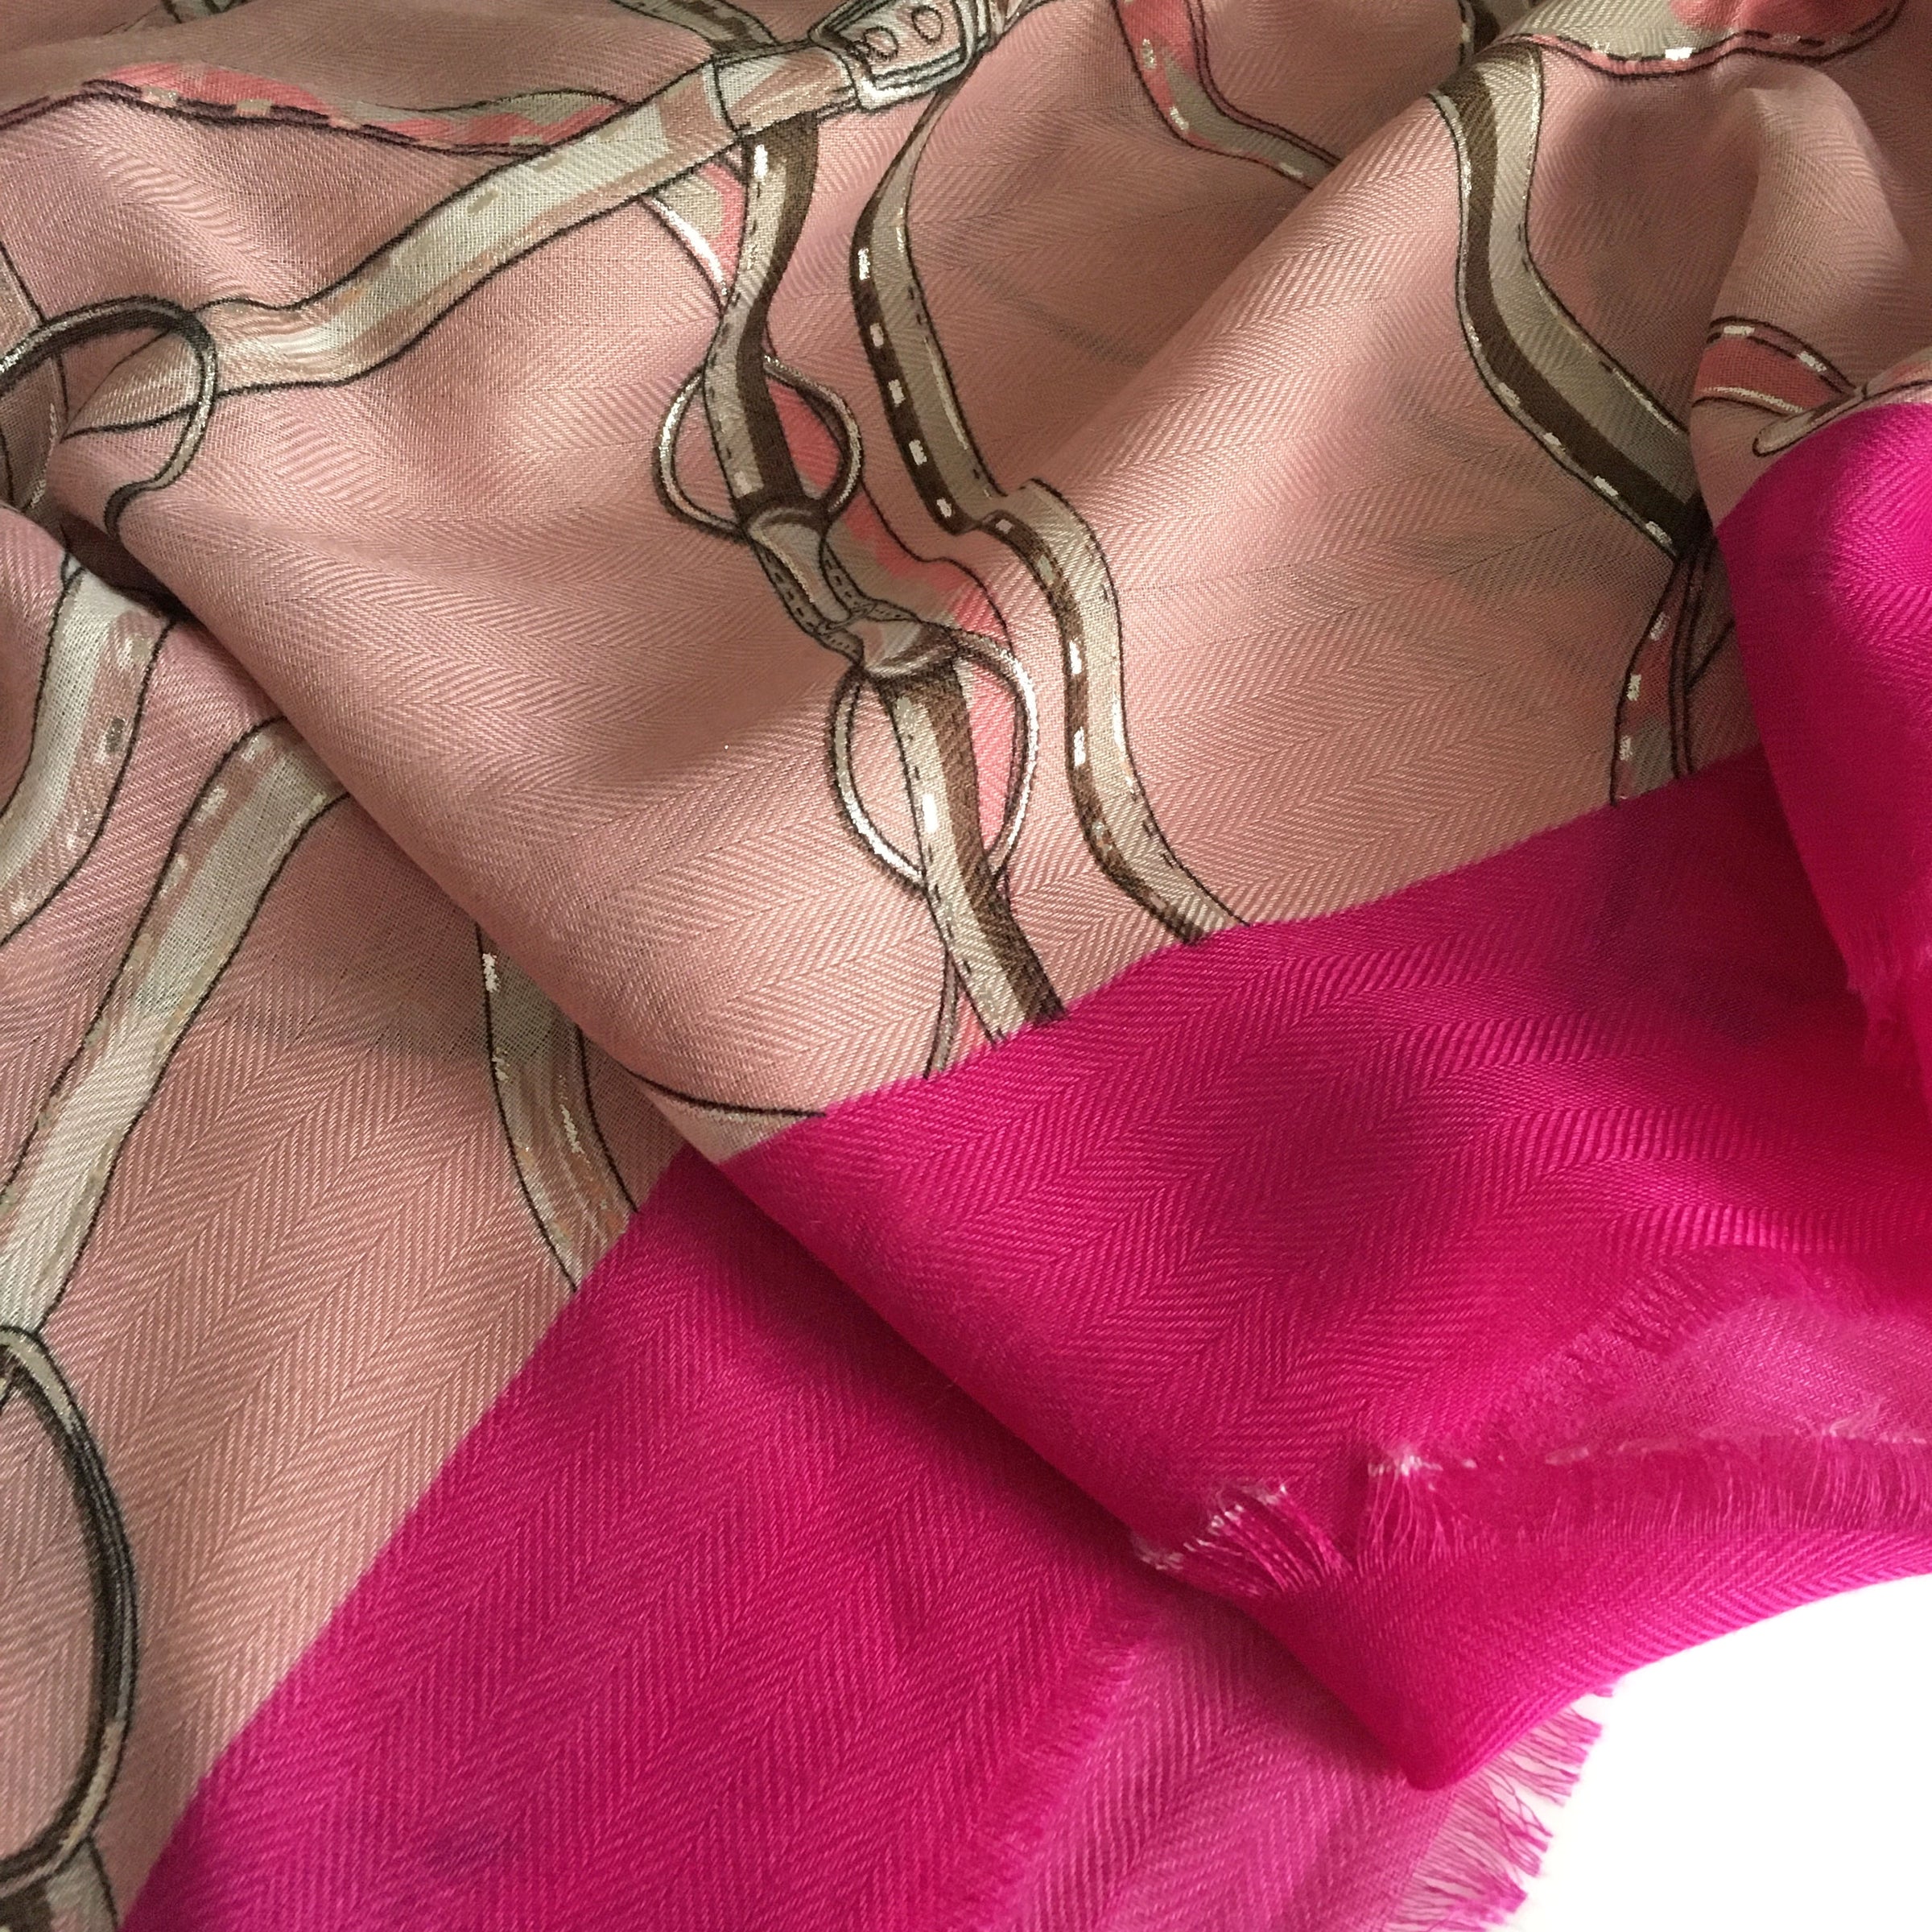 LARGE PINK CONTEMPORARY BUCKLE PRINT PASHMINA SHAWL SCARF